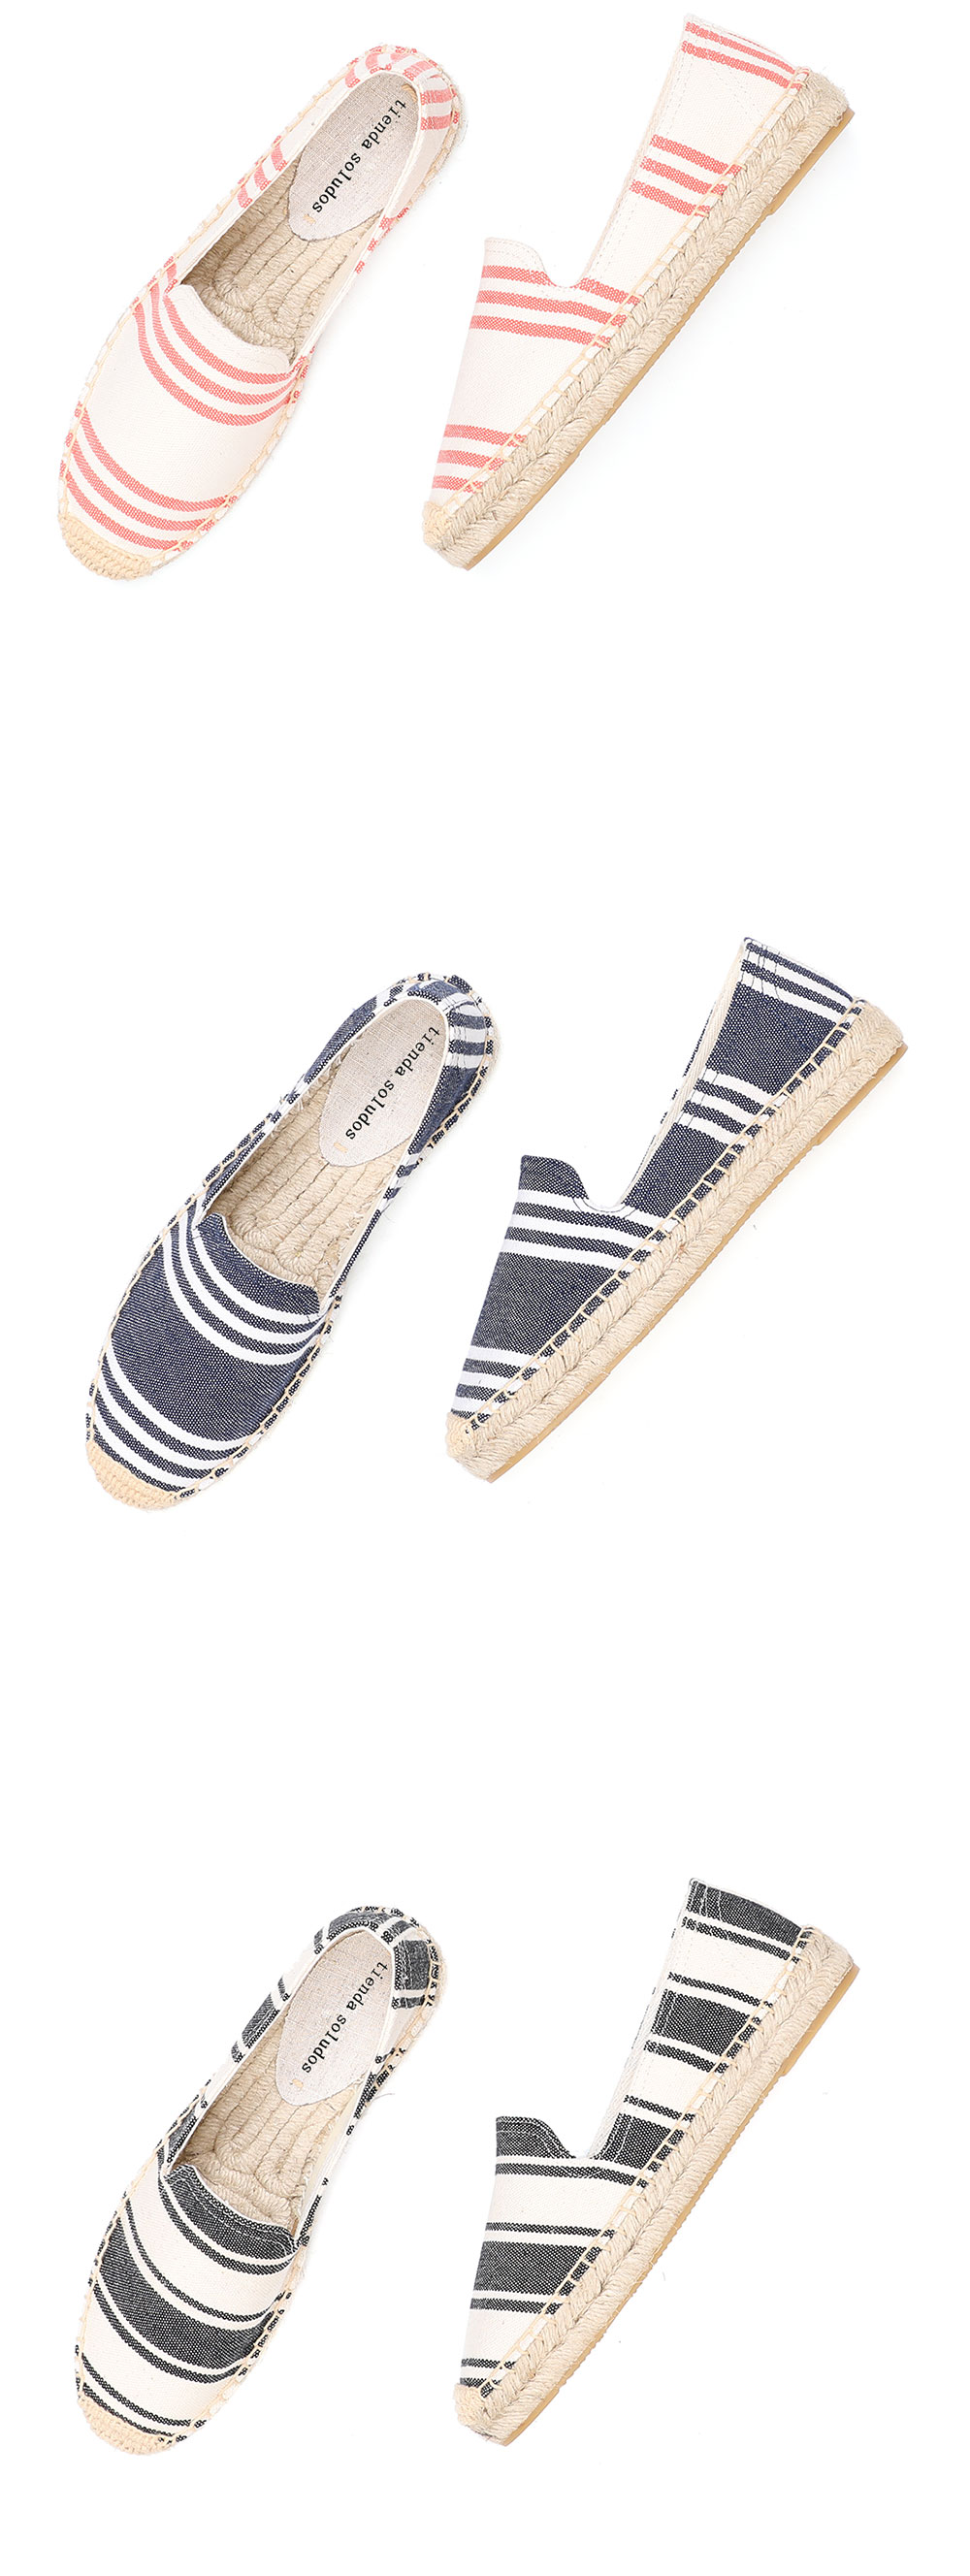 2021 Top Fashion New Arrival Flat Platform Hemp Rubber Slip-on Casual Sapatos Zapatillas Mujer Womens Espadrilles Shoes